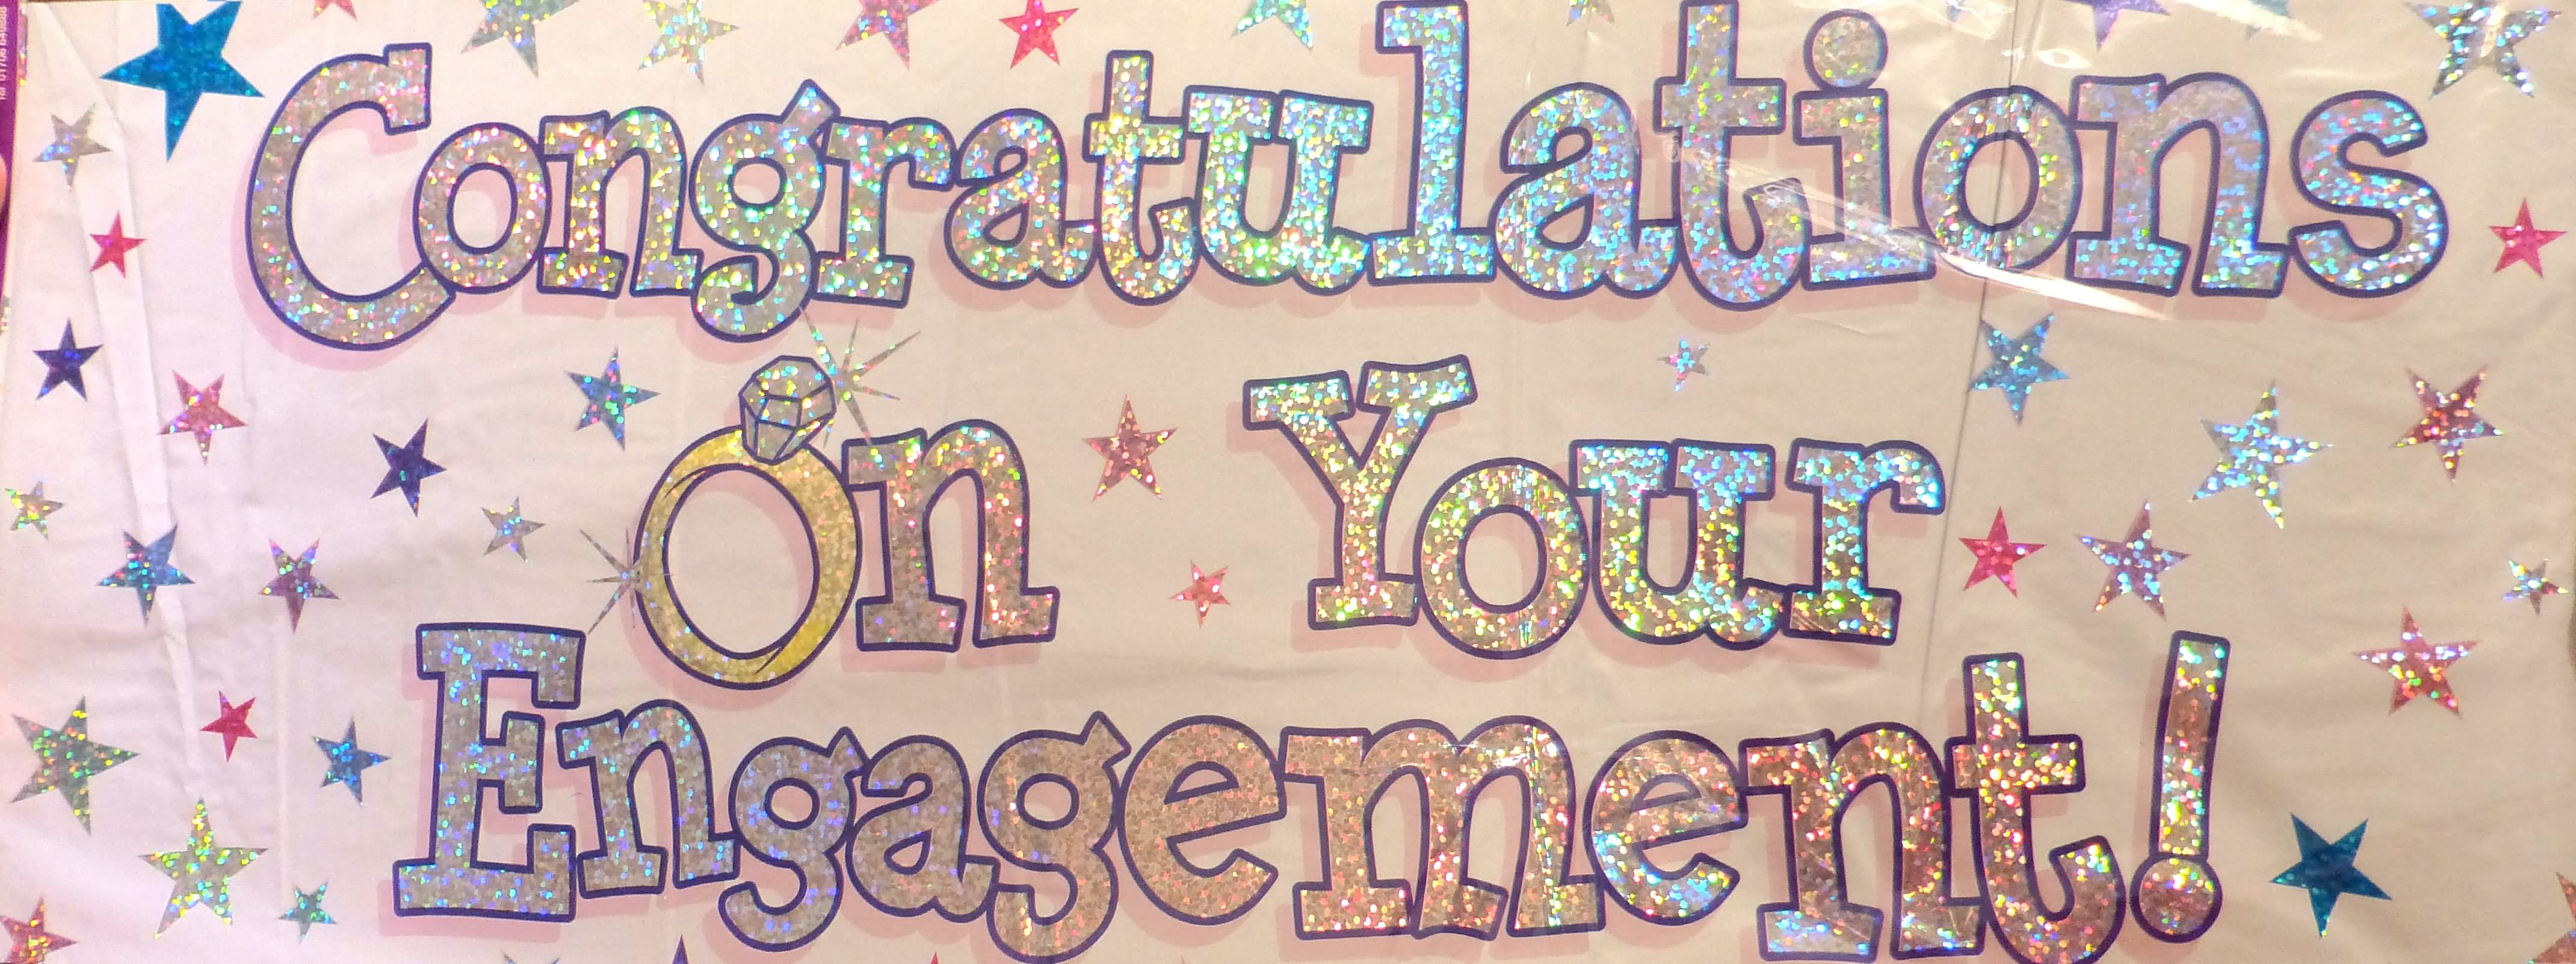 Congratulations On Your Engagement Facebook Cover Picture